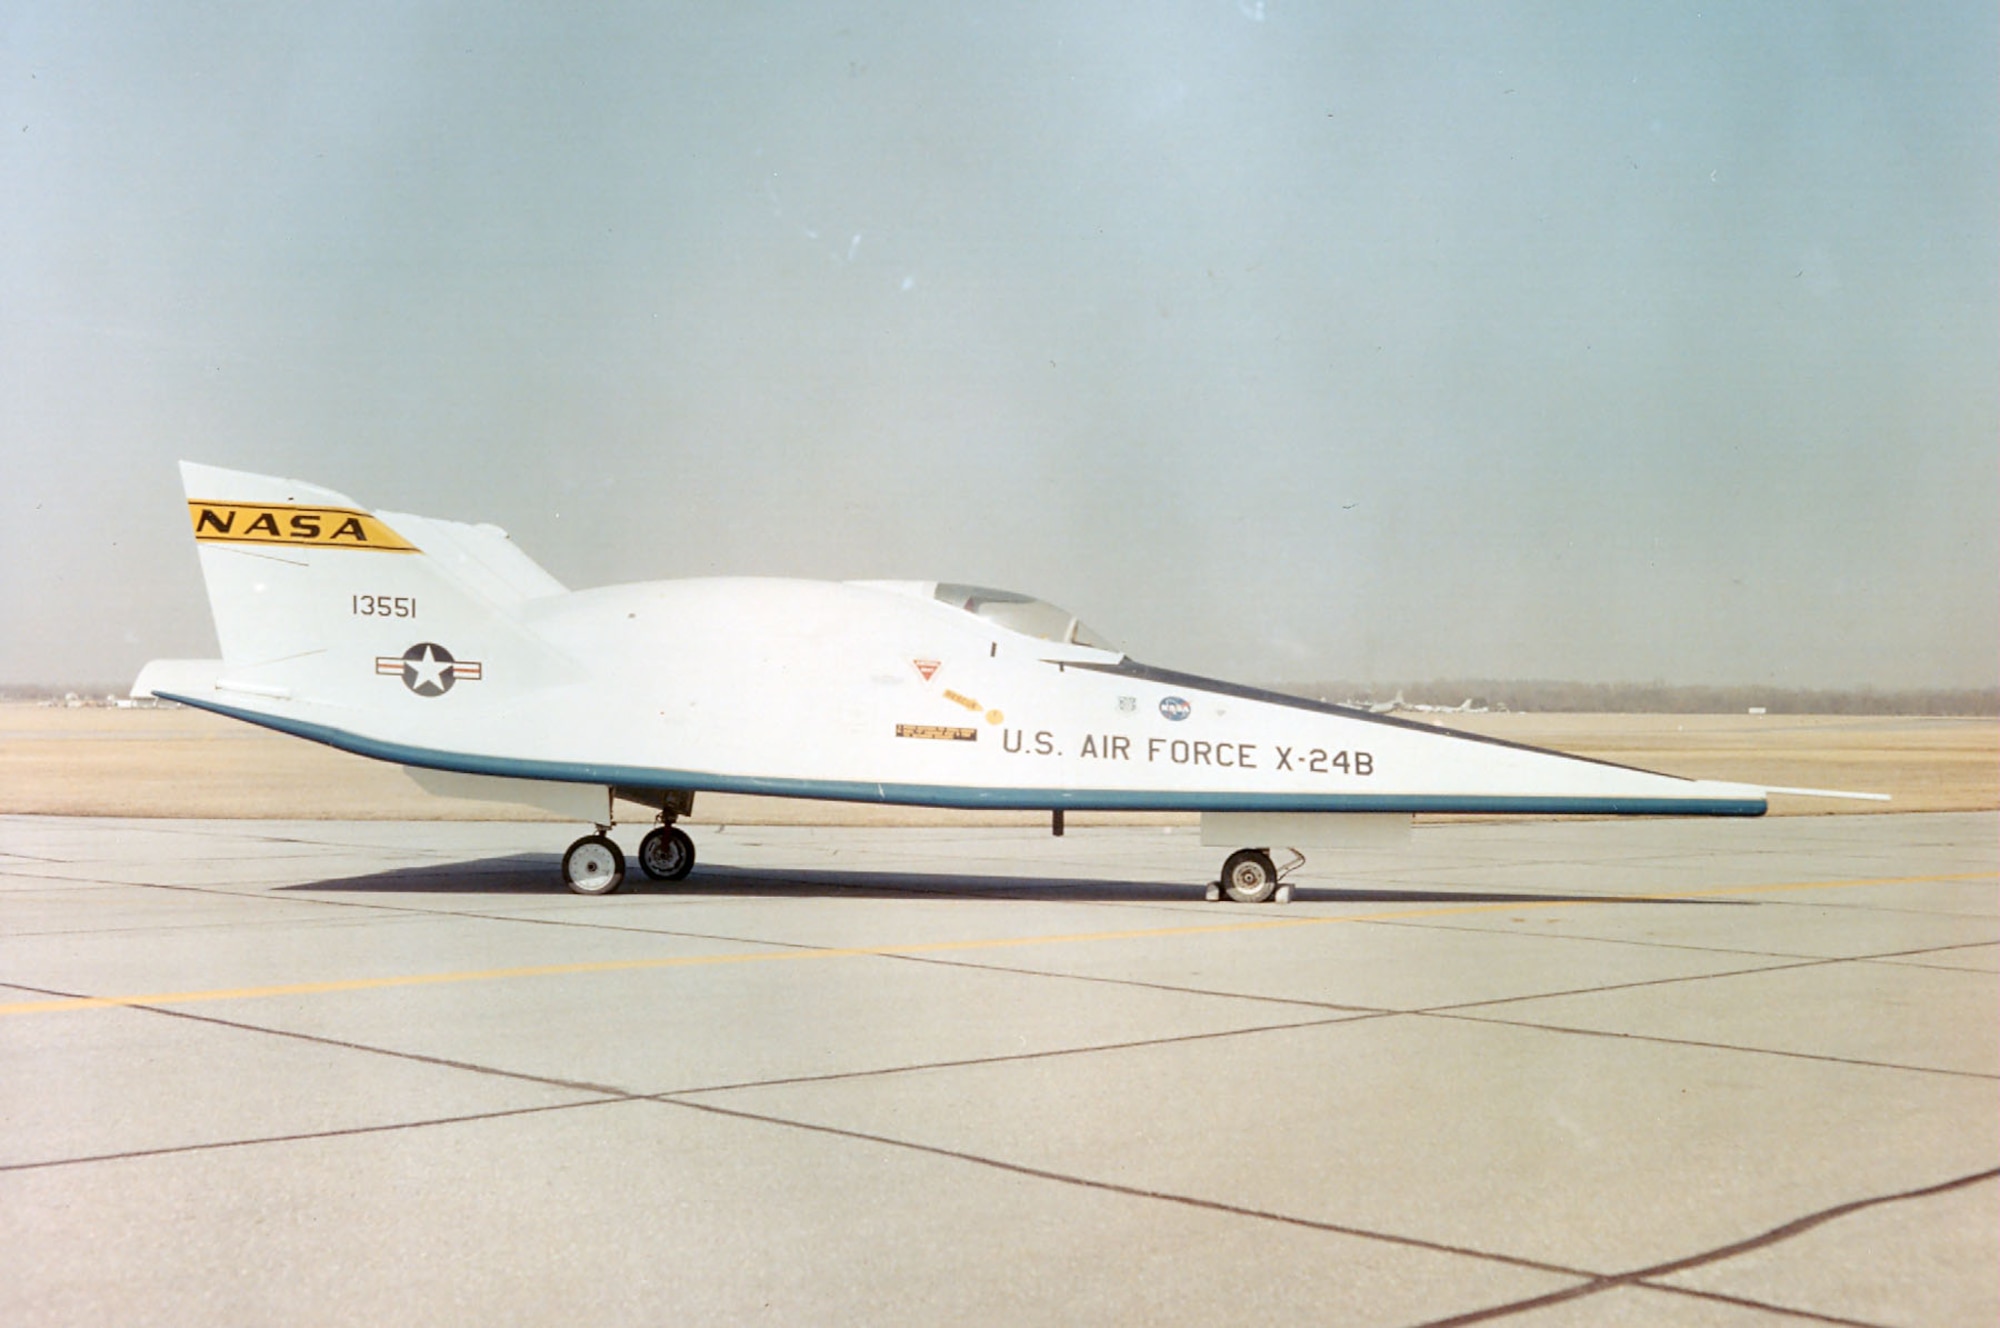 DAYTON, Ohio -- Martin X-24B at the National Museum of the United States Air Force. (U.S. Air Force photo)